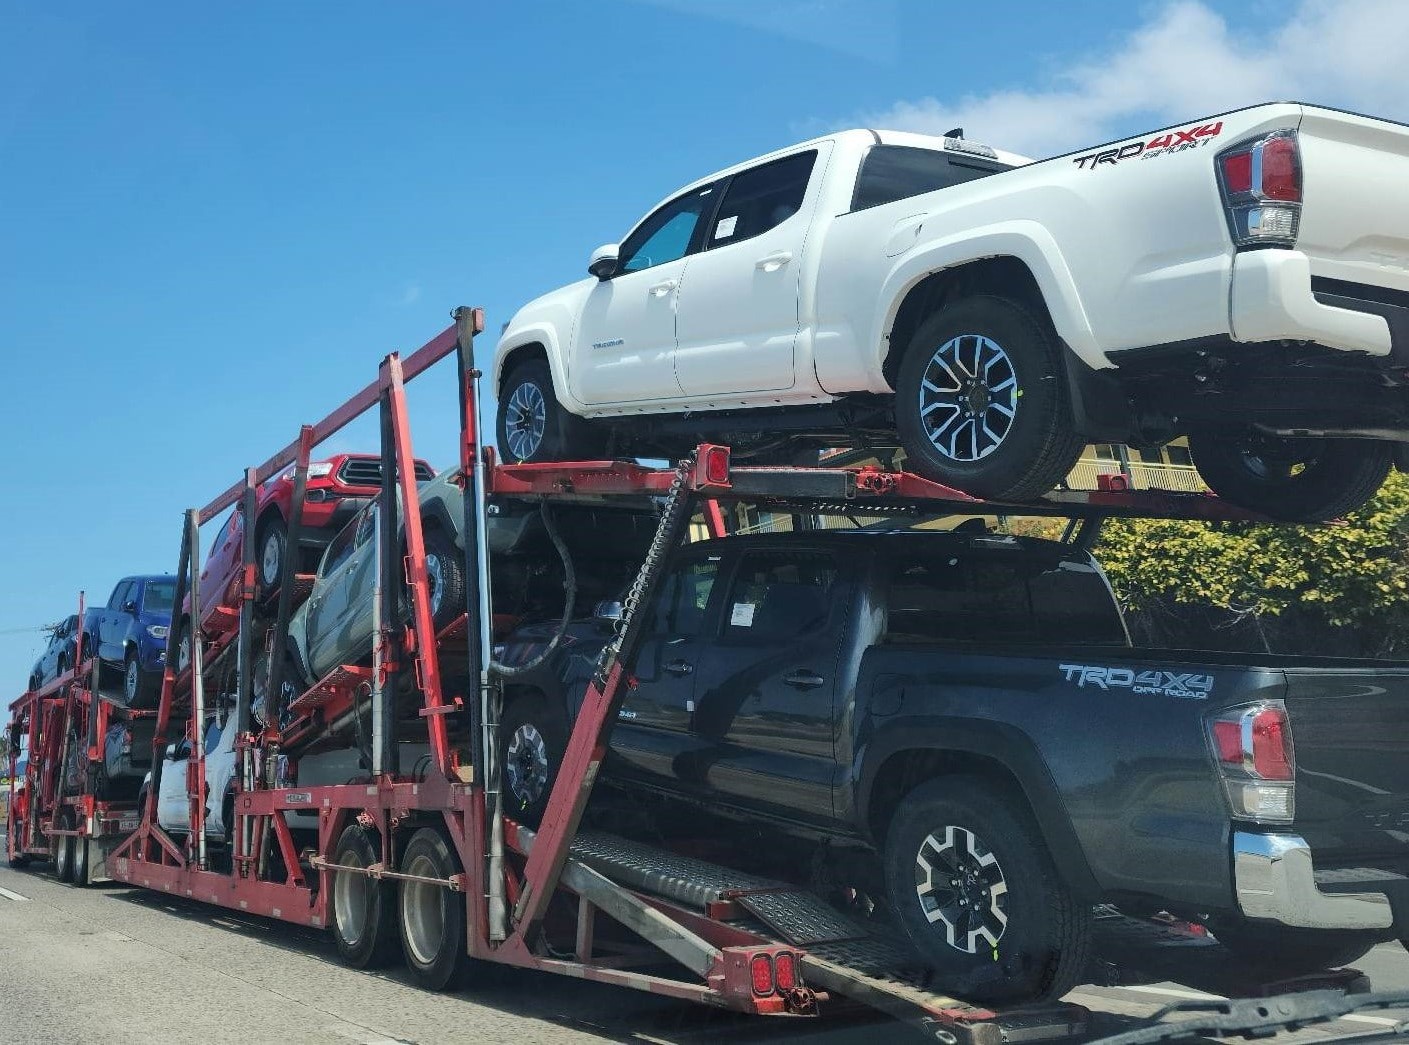 Tow truck with many vehicles on a long distance tow job